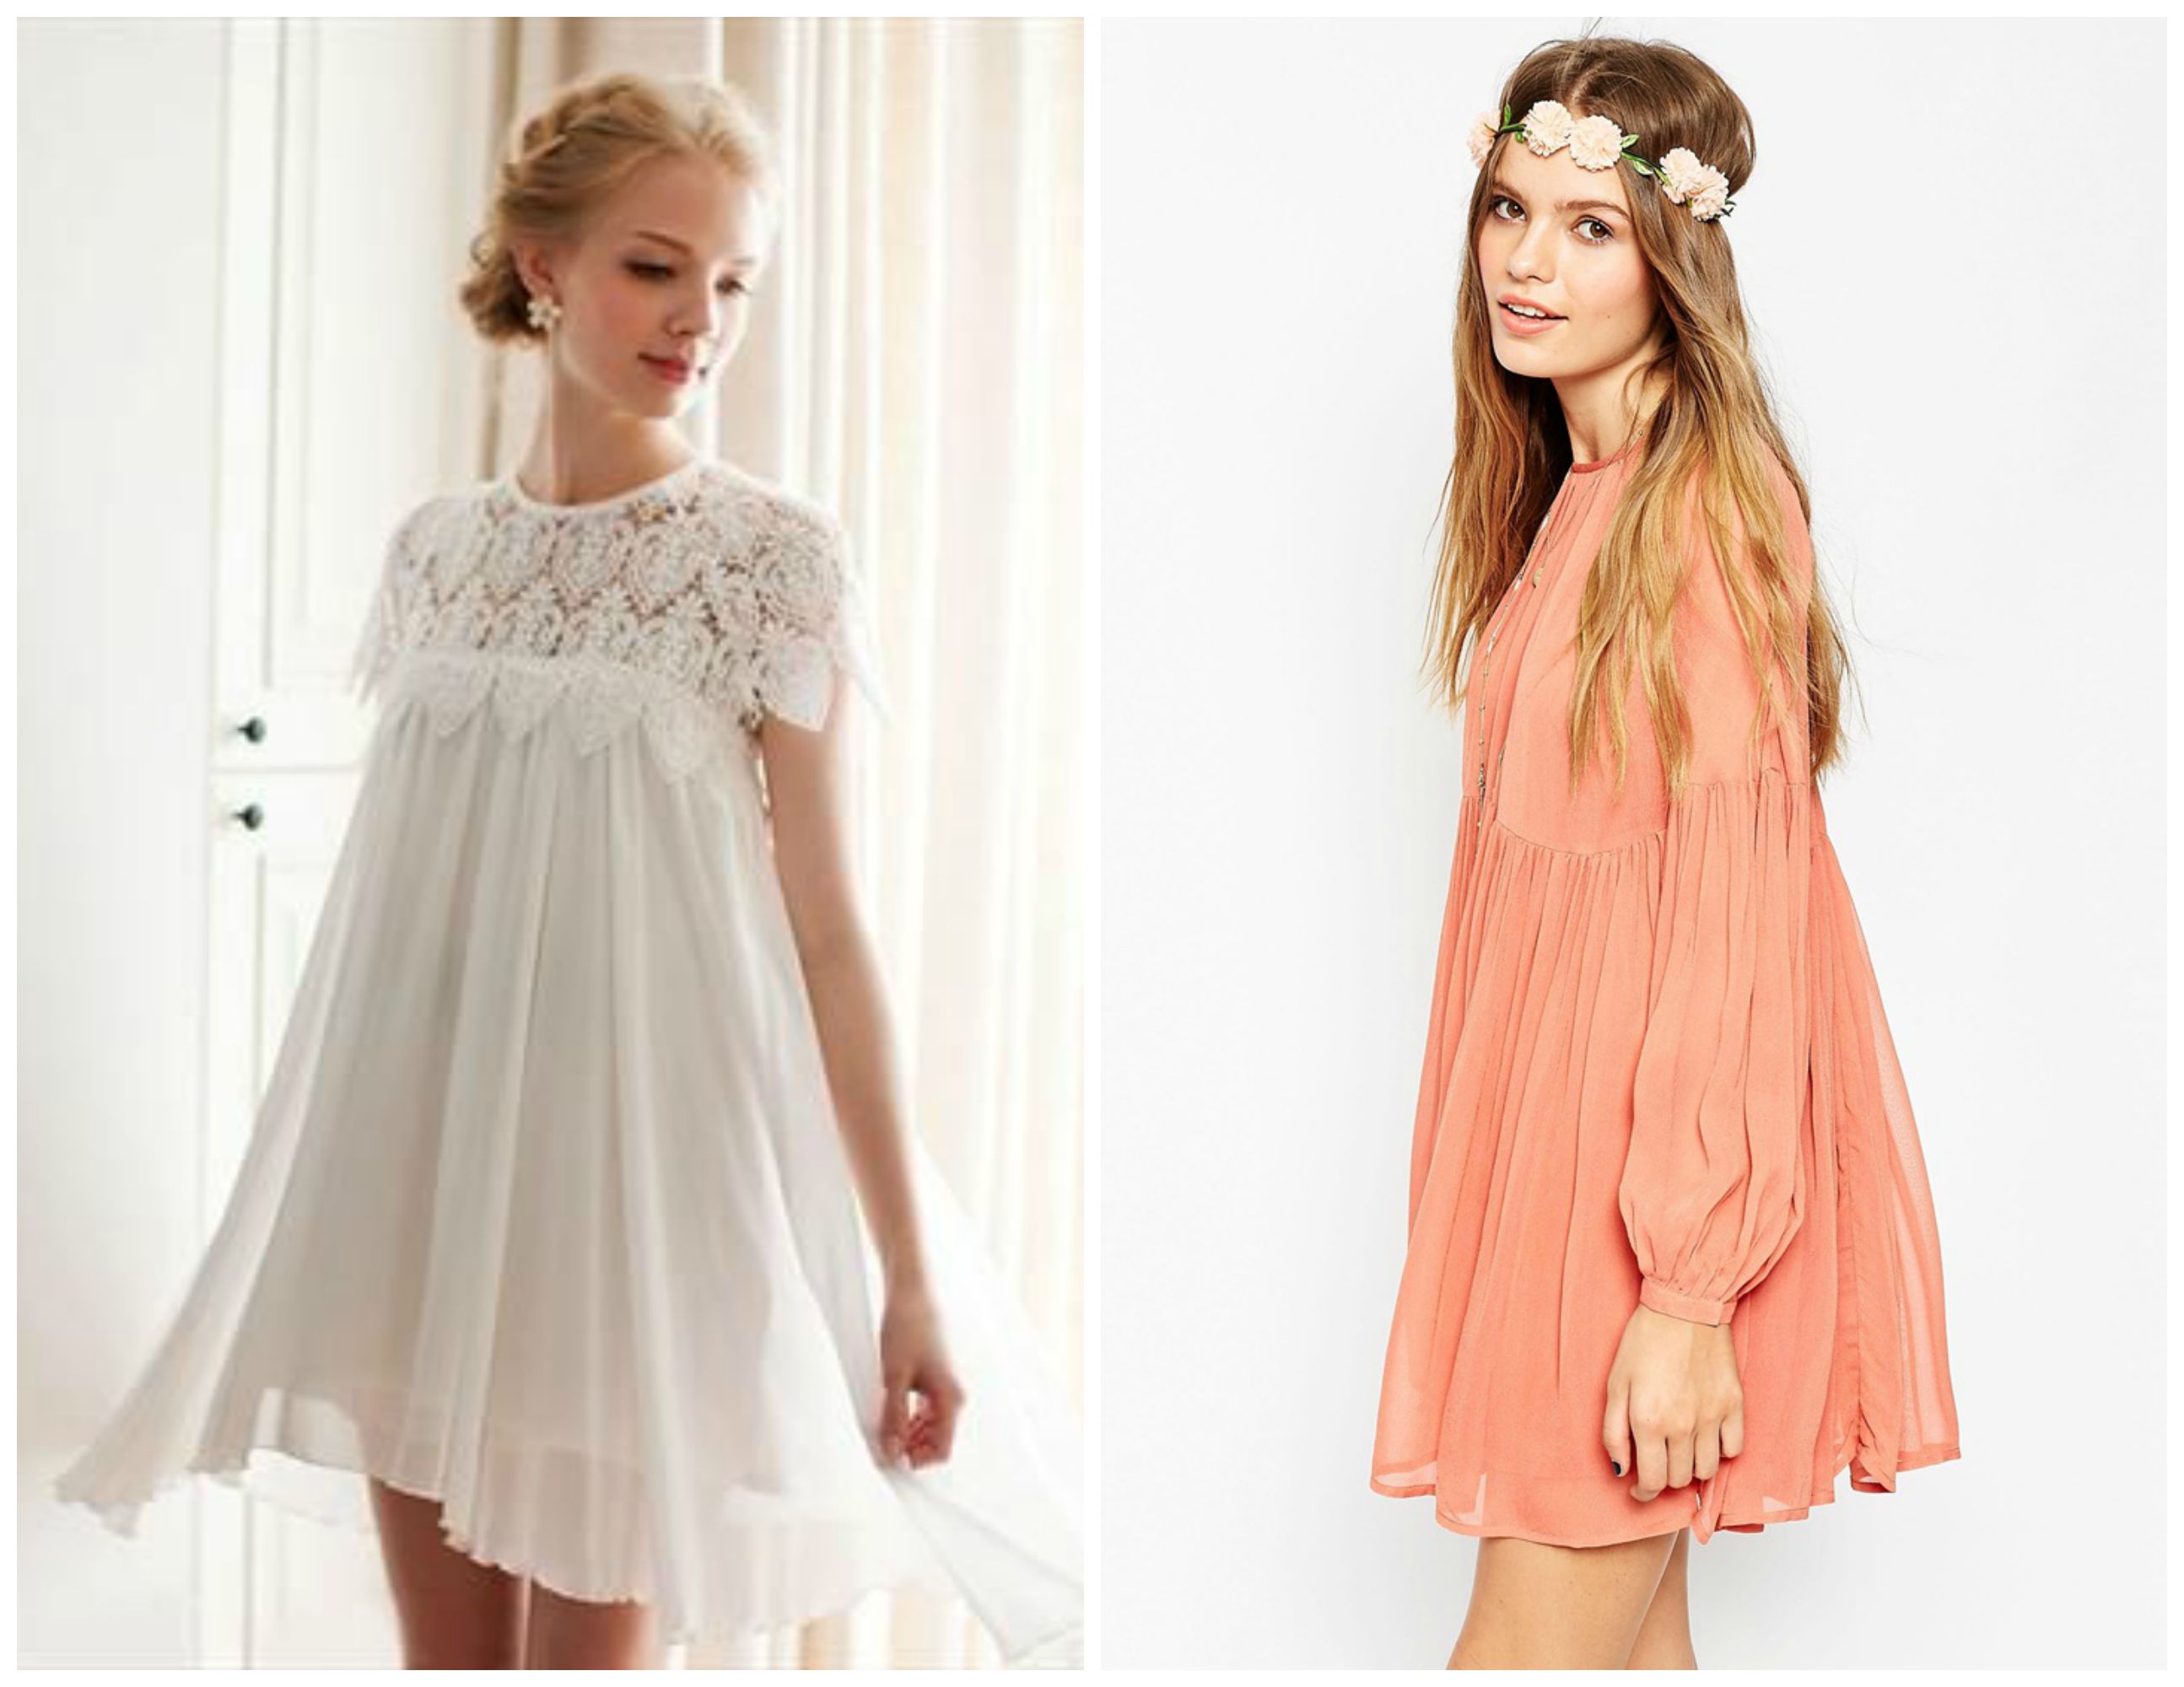 How To Wear The Babydoll Bridesmaid Dress